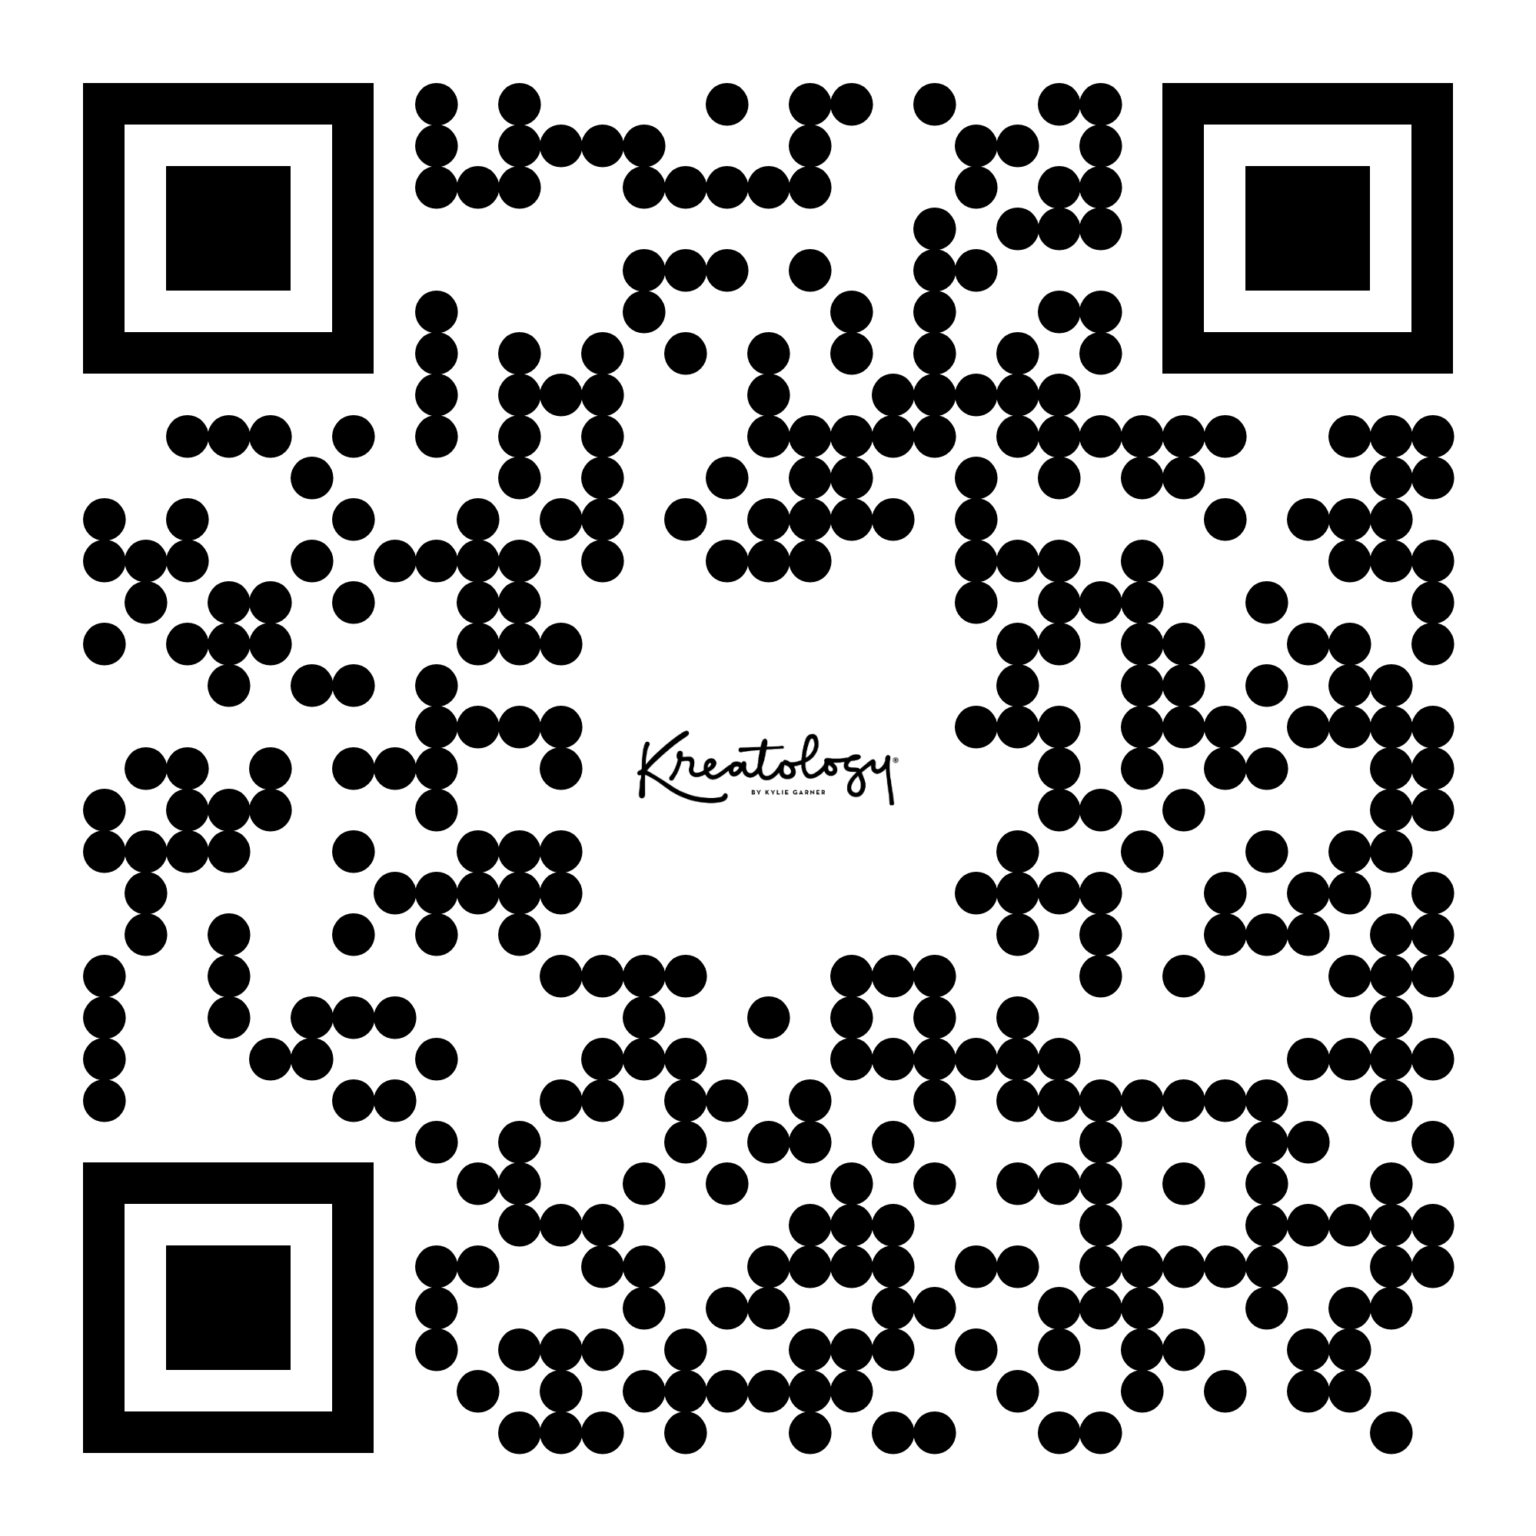 QR Code Generator: Get Creative with our Free Online QR Code Maker